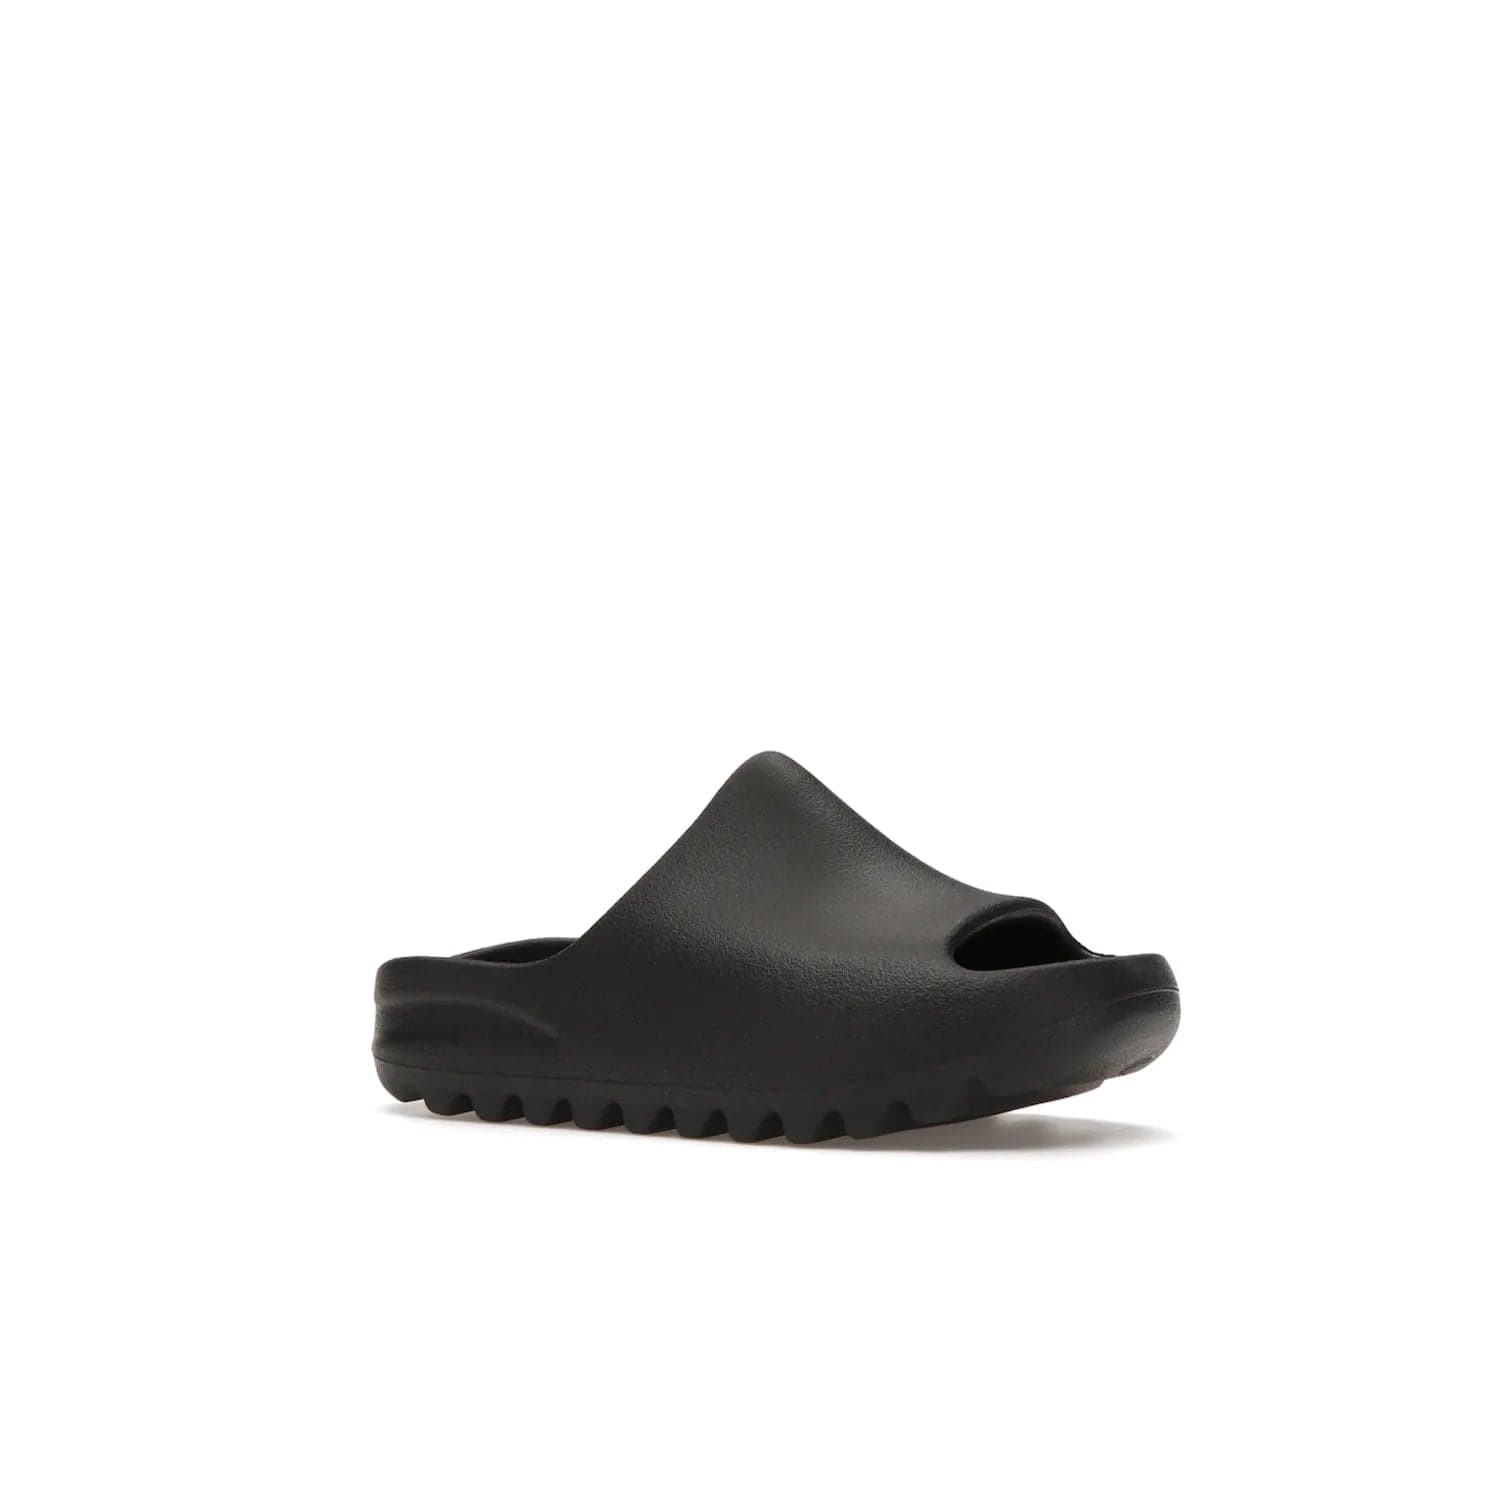 adidas Yeezy Slide Onyx (Kids) - Image 4 - Only at www.BallersClubKickz.com - adidas Yeezy Slide Onyx (Kids): Comfortable foam construction with textured surface and iconic three-stripe logo. Breathable, open-toe design and deep grooves for traction. Released in March 2021 at $50.